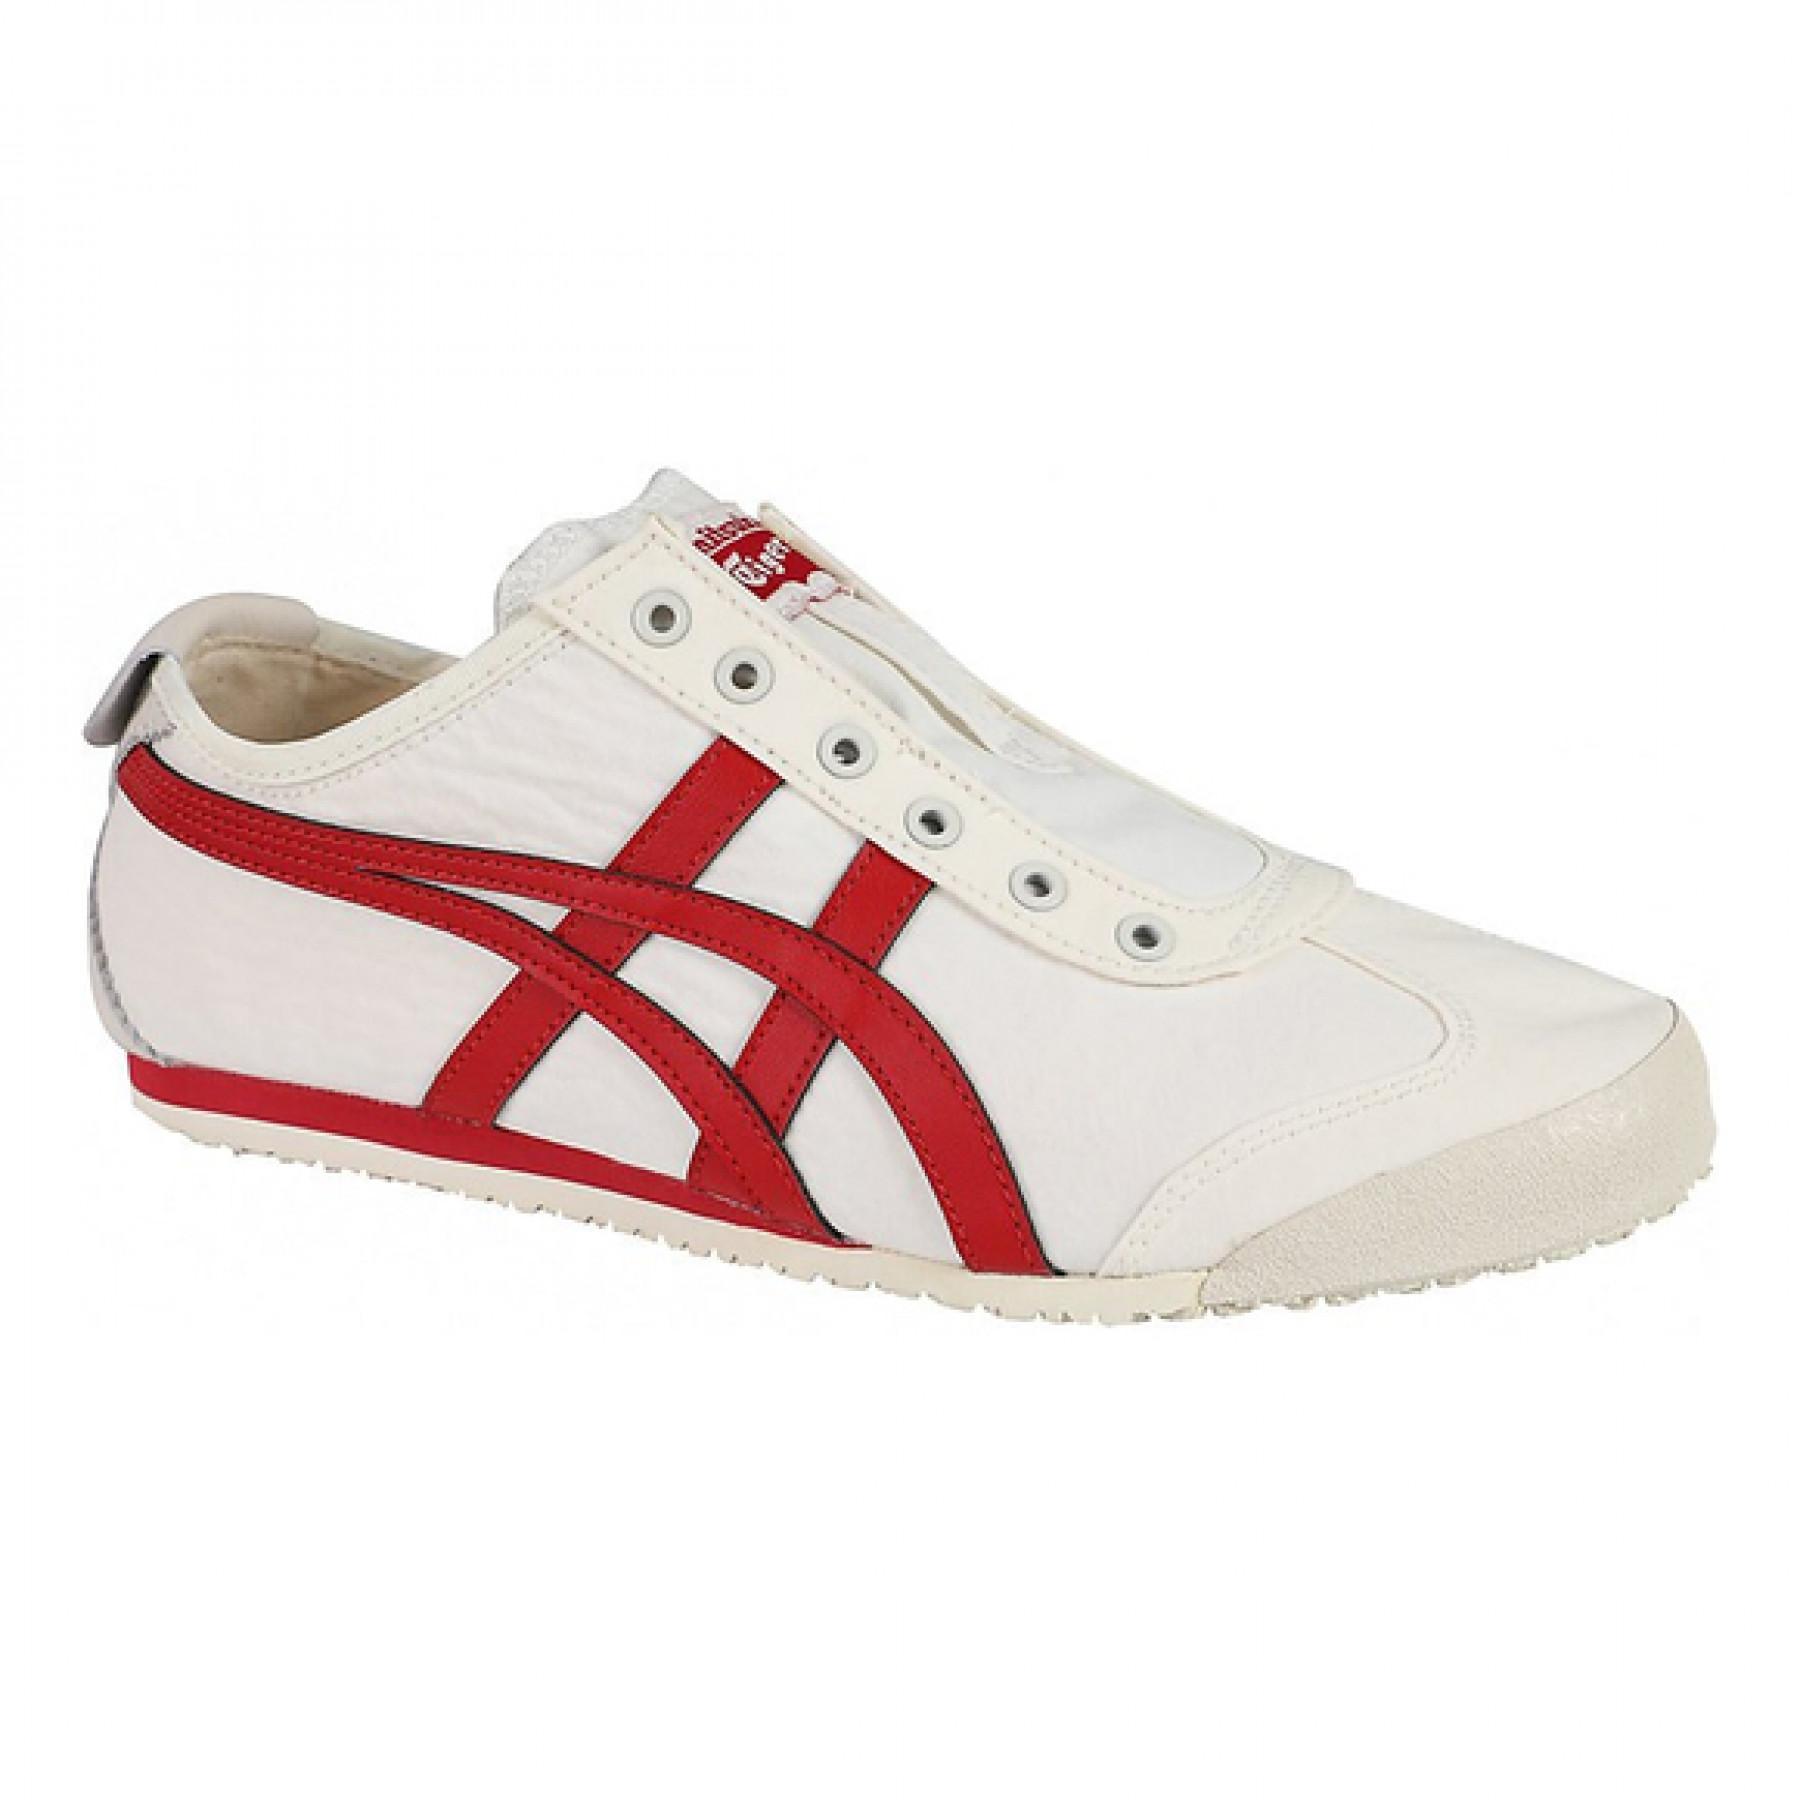 Sneakers Onitsuka Tiger Mexico 66 Slip-on - Others - Top Brands - Women